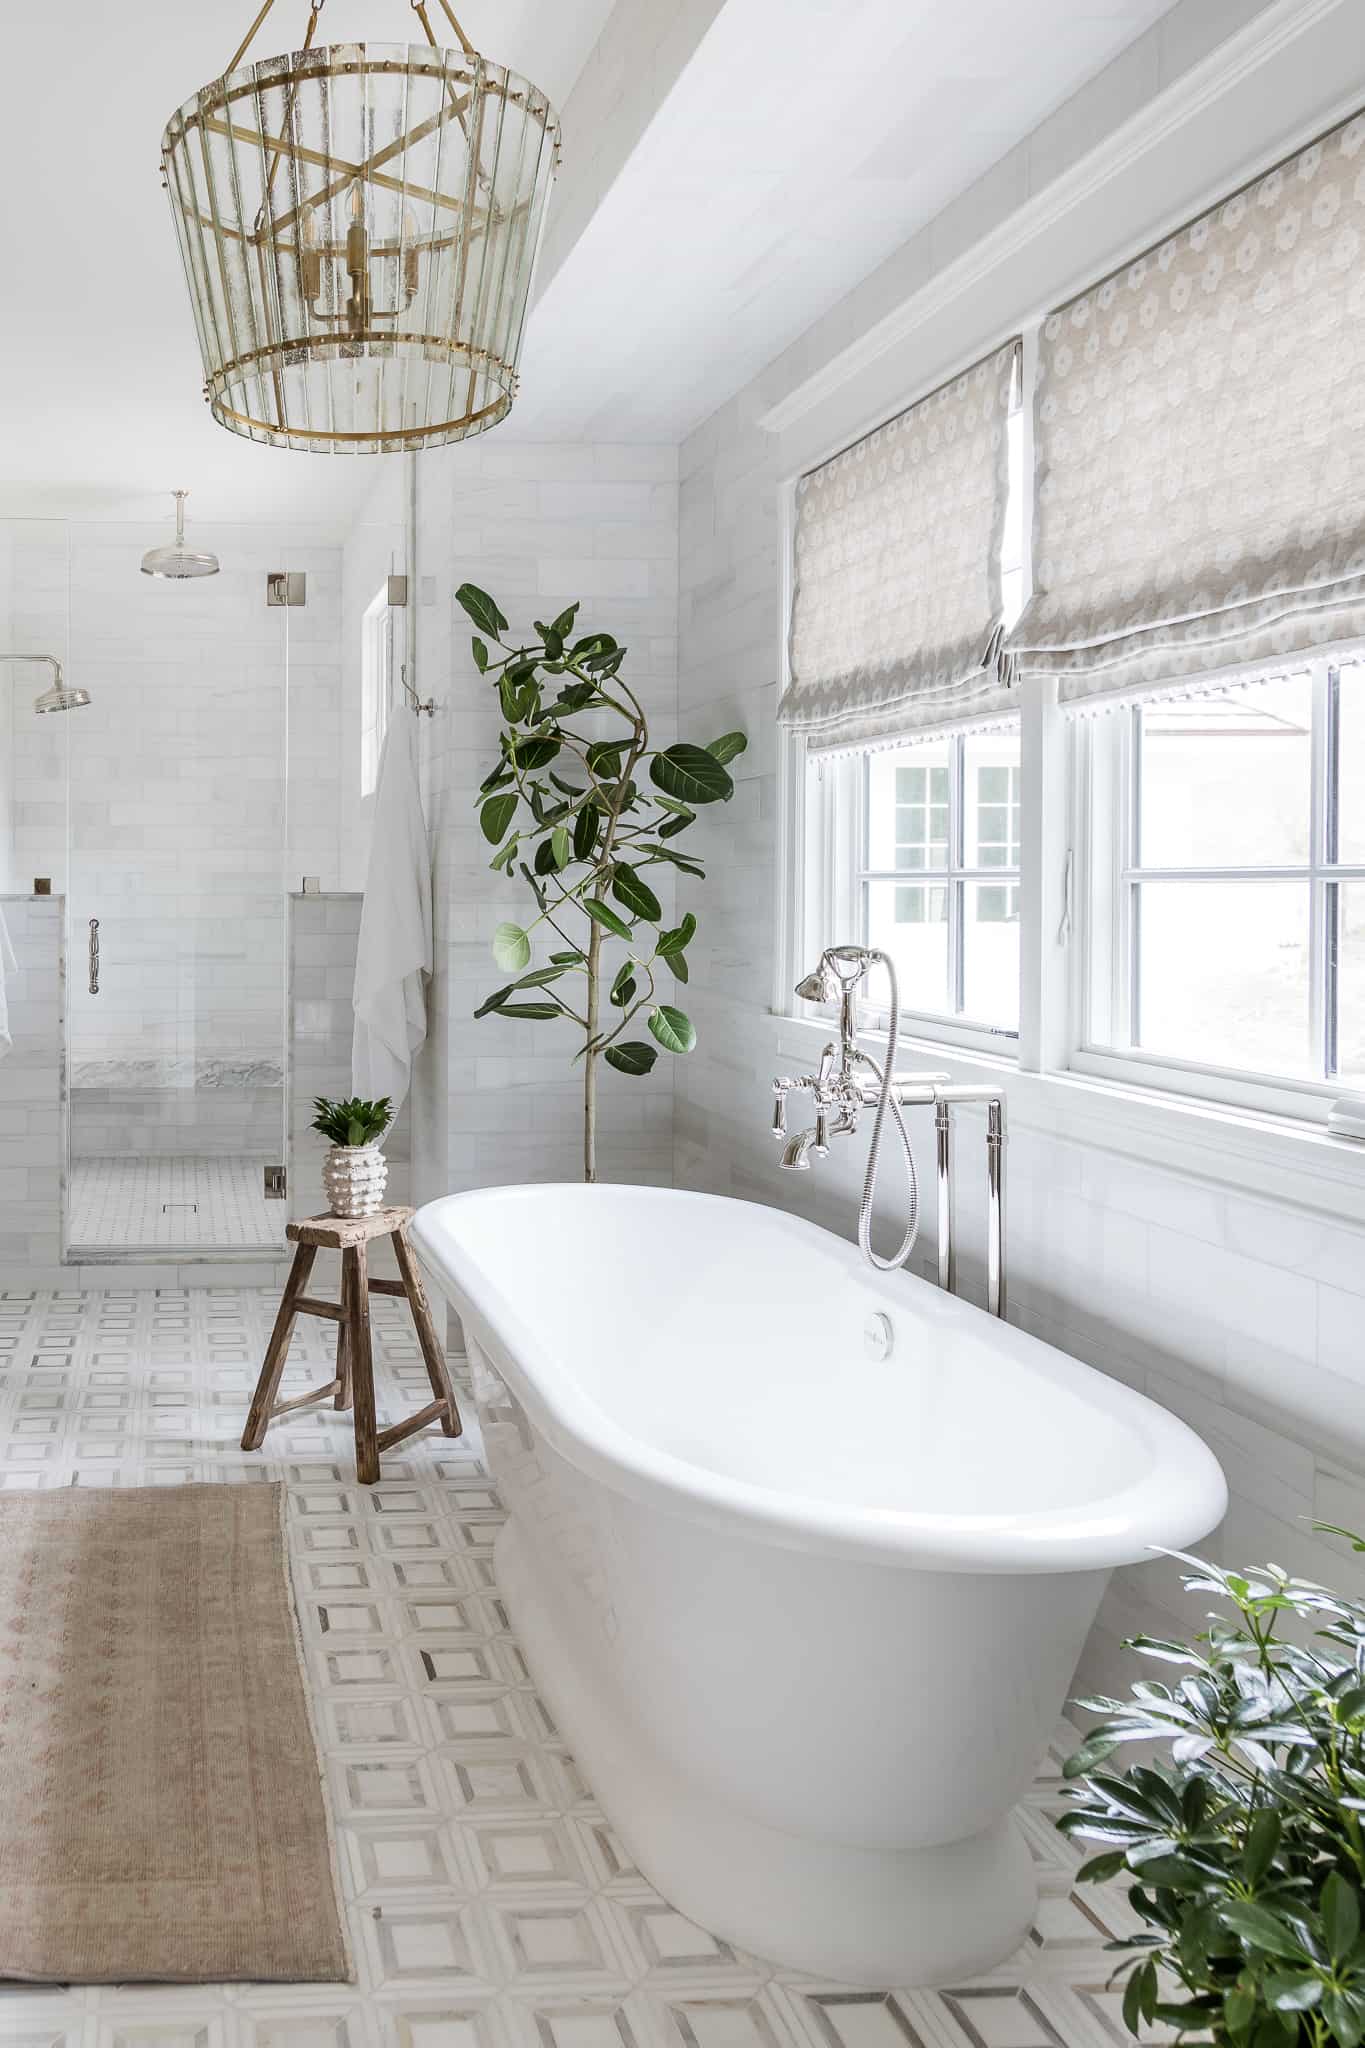 Main Bathroom With Freestanding Tub - Mindy Gayer Design Co.